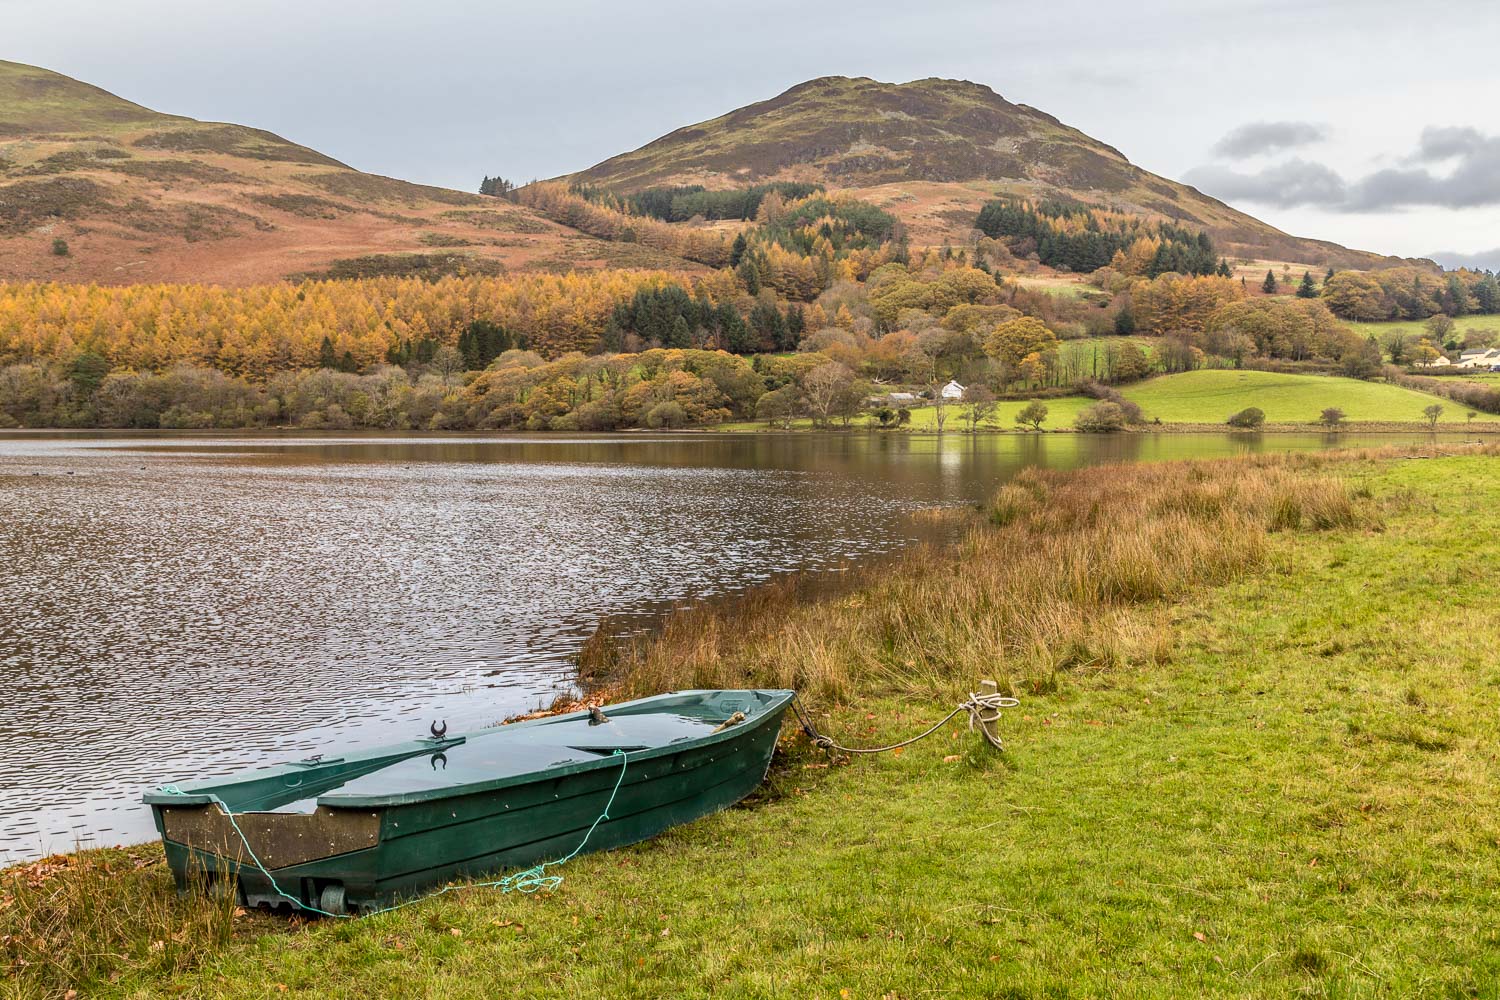 Holme Wood Loweswater